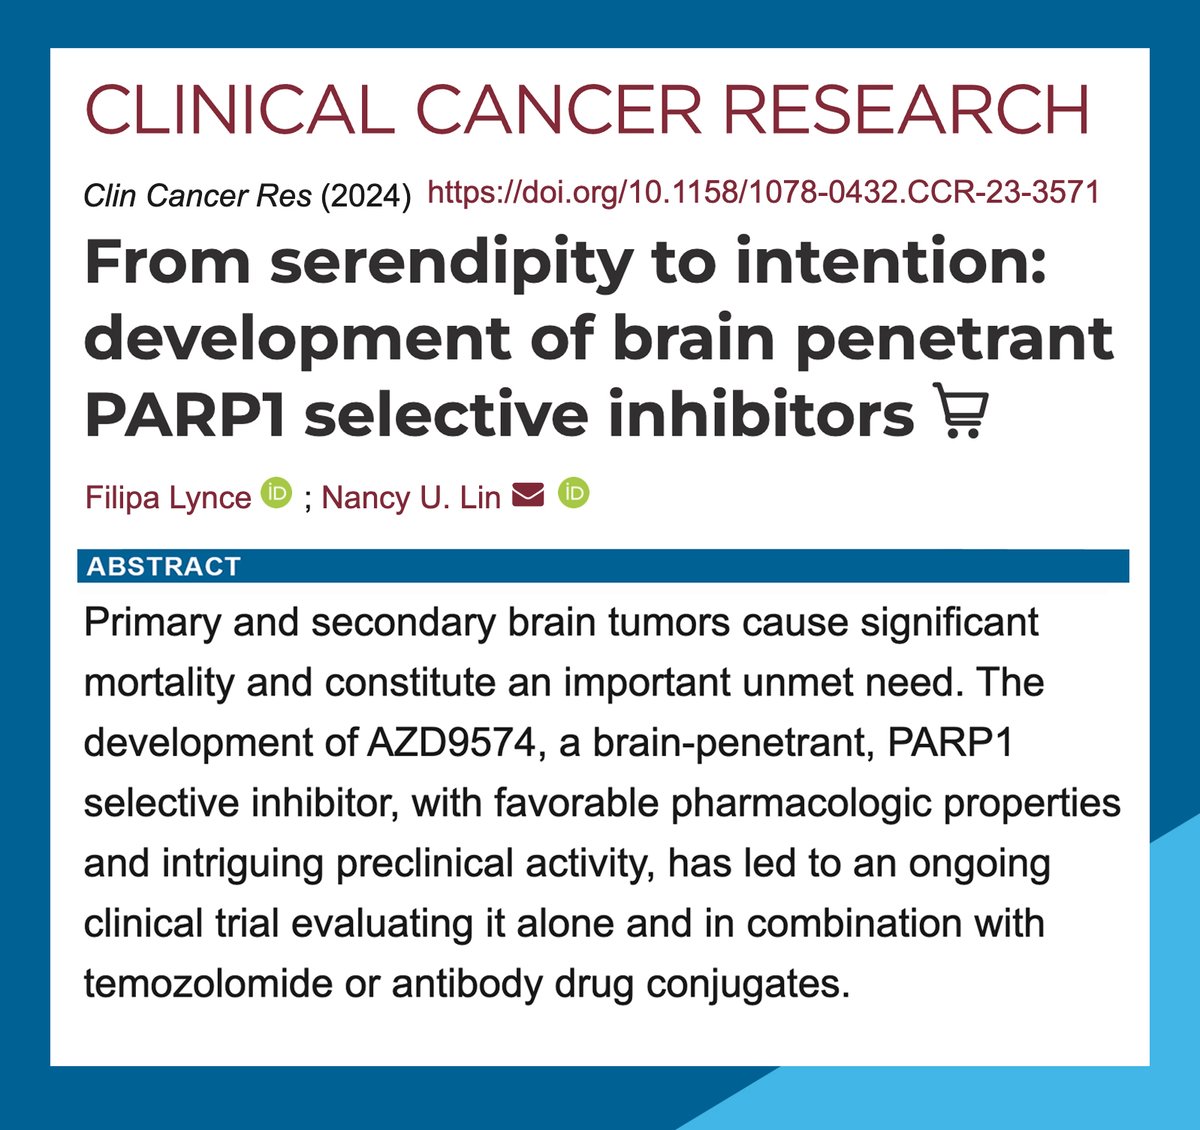 'From serendipity to intention: development of brain penetrant PARP1 selective inhibitors' - recent commentary from Dr. Filipa Lynce (@FilipaLynce) and Dr. Nancy Lin (@nlinmd). pubmed.ncbi.nlm.nih.gov/38251977/